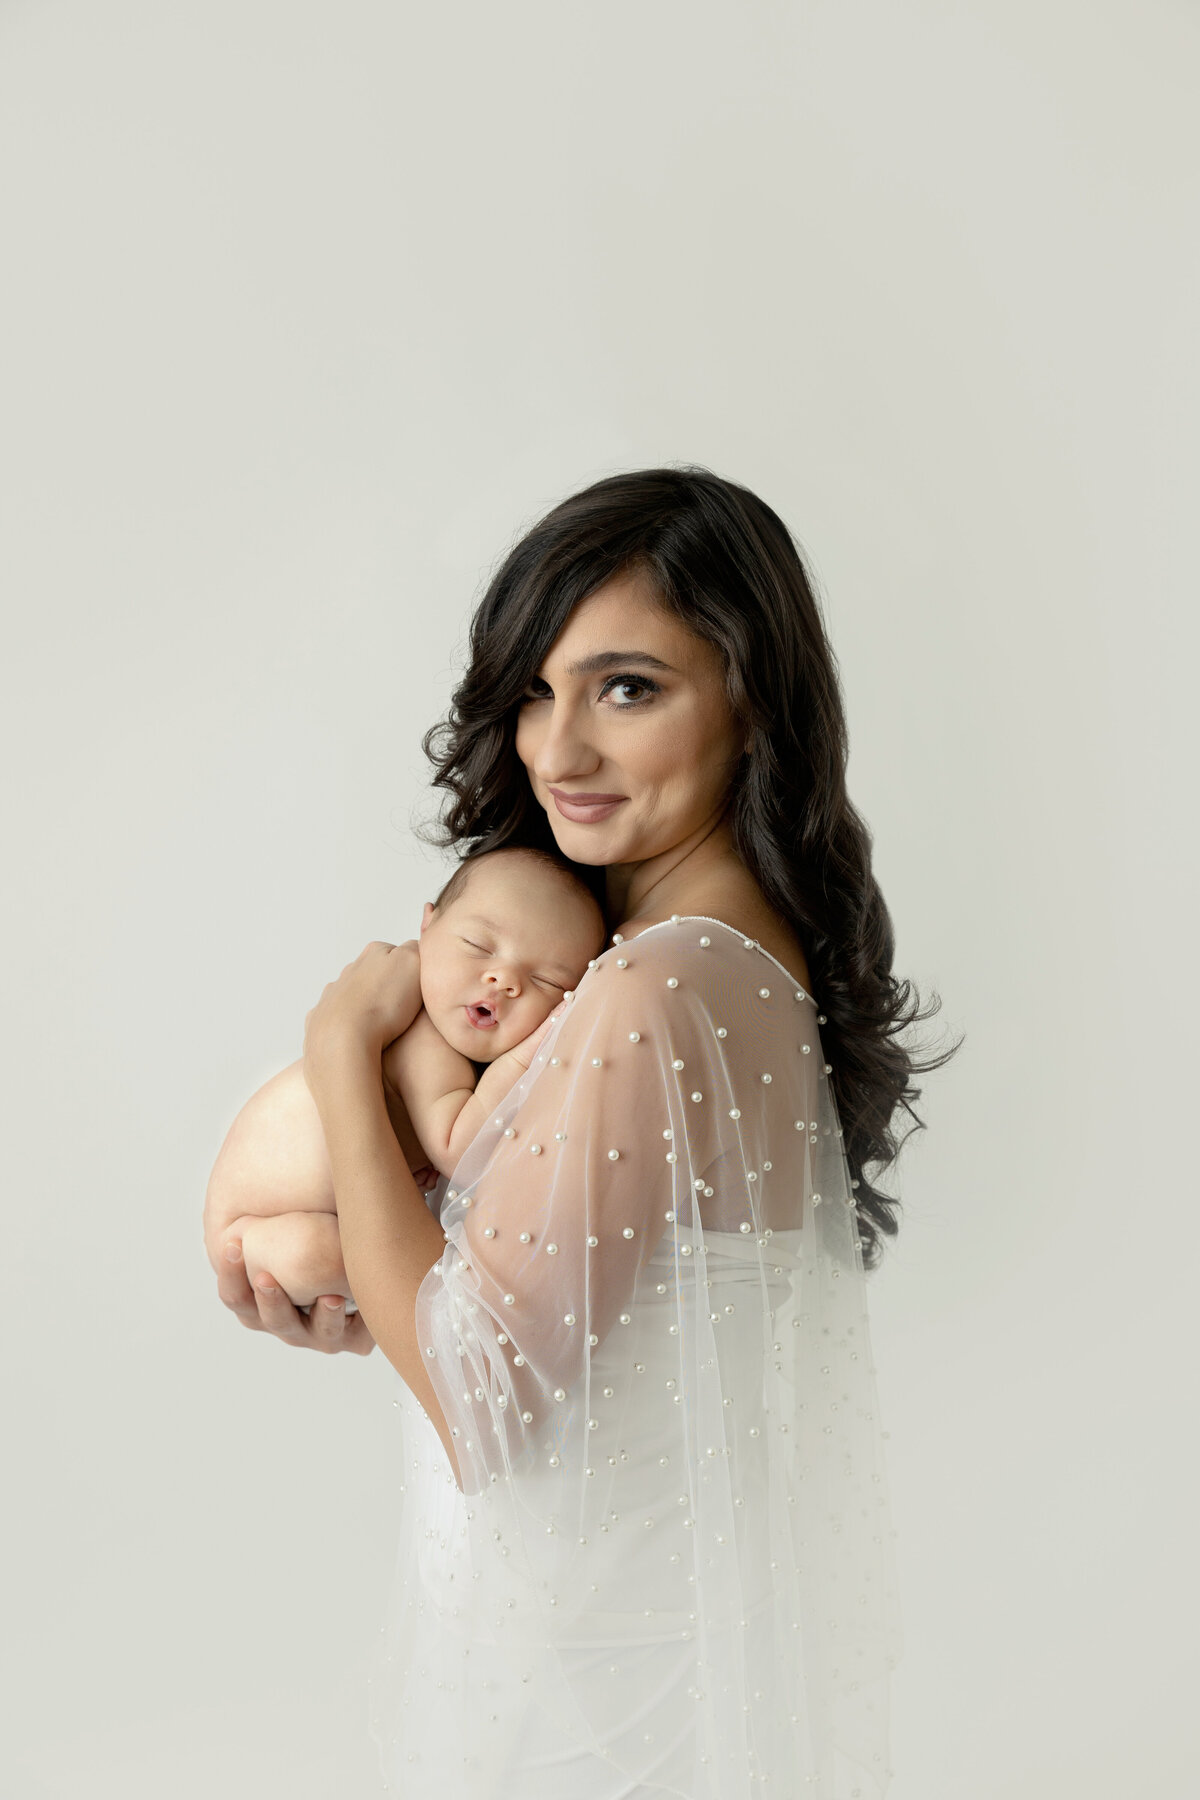 A happy mother in a whtie dress cradles her sleeping newborn against her chest